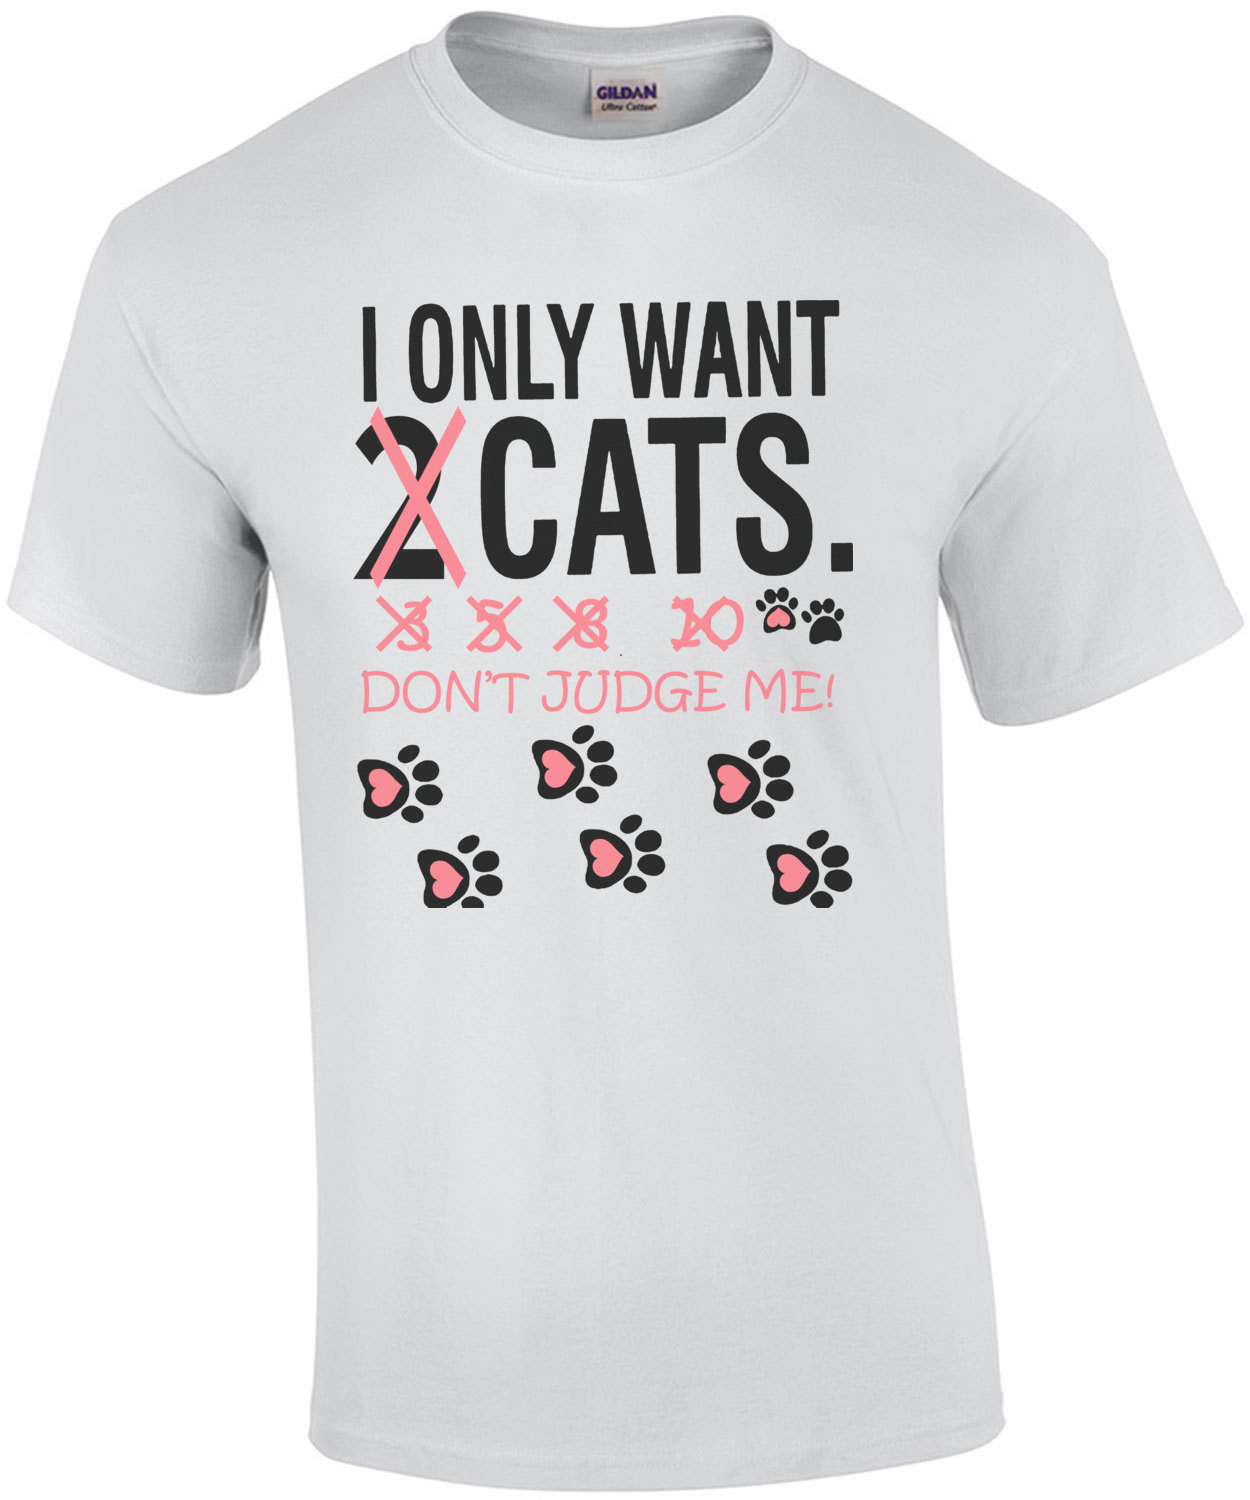 I Only Want 2 Cats Dont Judge Me Crossed Out T-Shirt